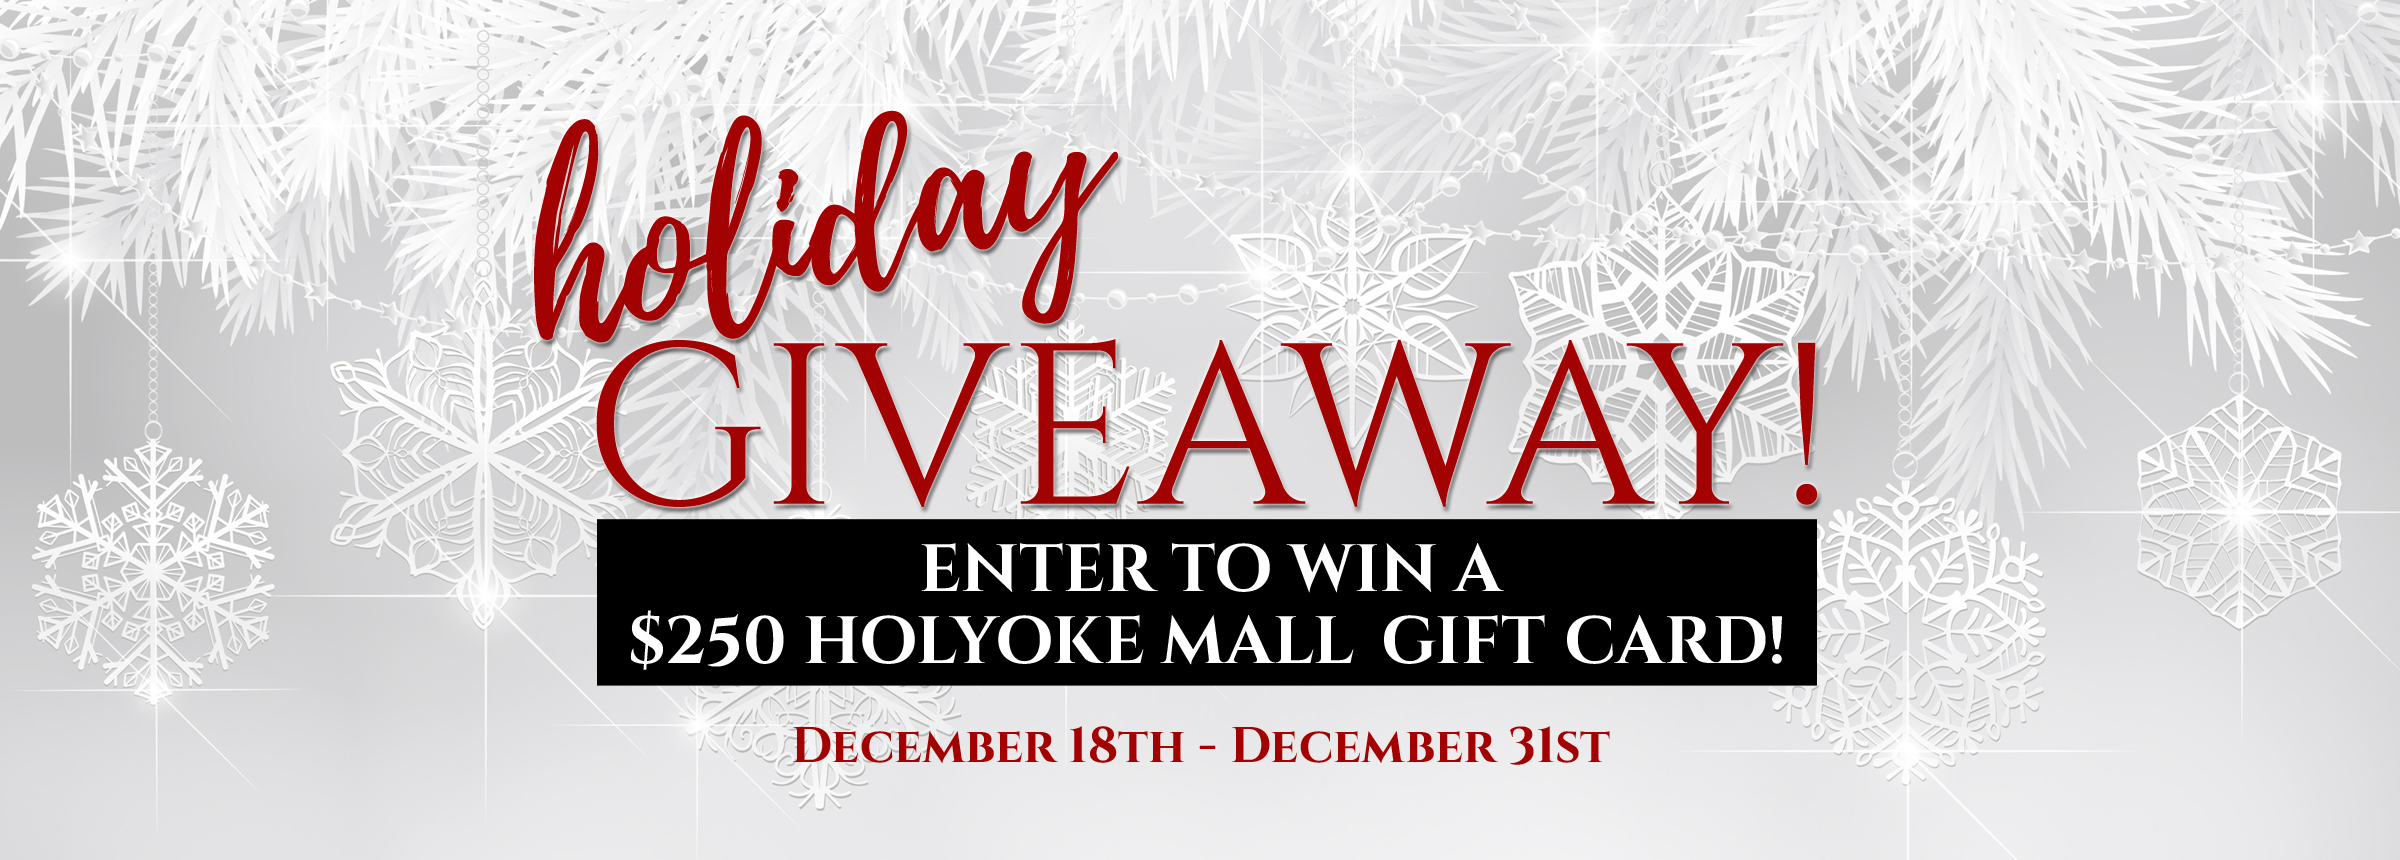 REVISED Holiday Giveaway Contest Image